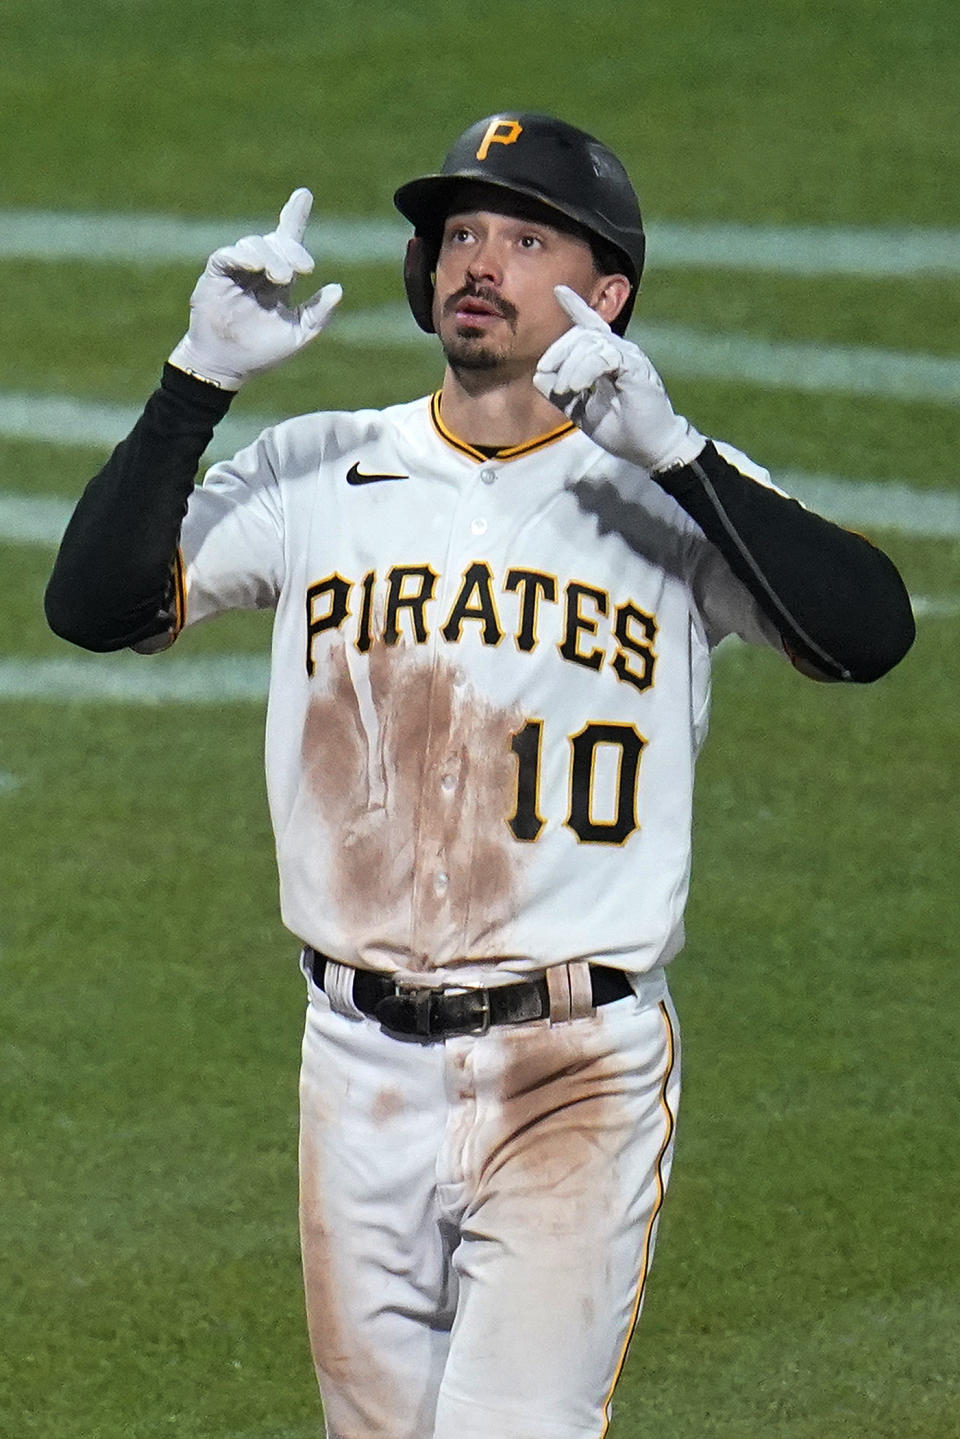 Pittsburgh Pirates' Bryan Reynolds crosses home plate after hitting a solo home run off Chicago Cubs relief pitcher Manuel Rodriguez during the seventh inning of a baseball game in Pittsburgh, Friday, Sept. 23, 2022. (AP Photo/Gene J. Puskar)